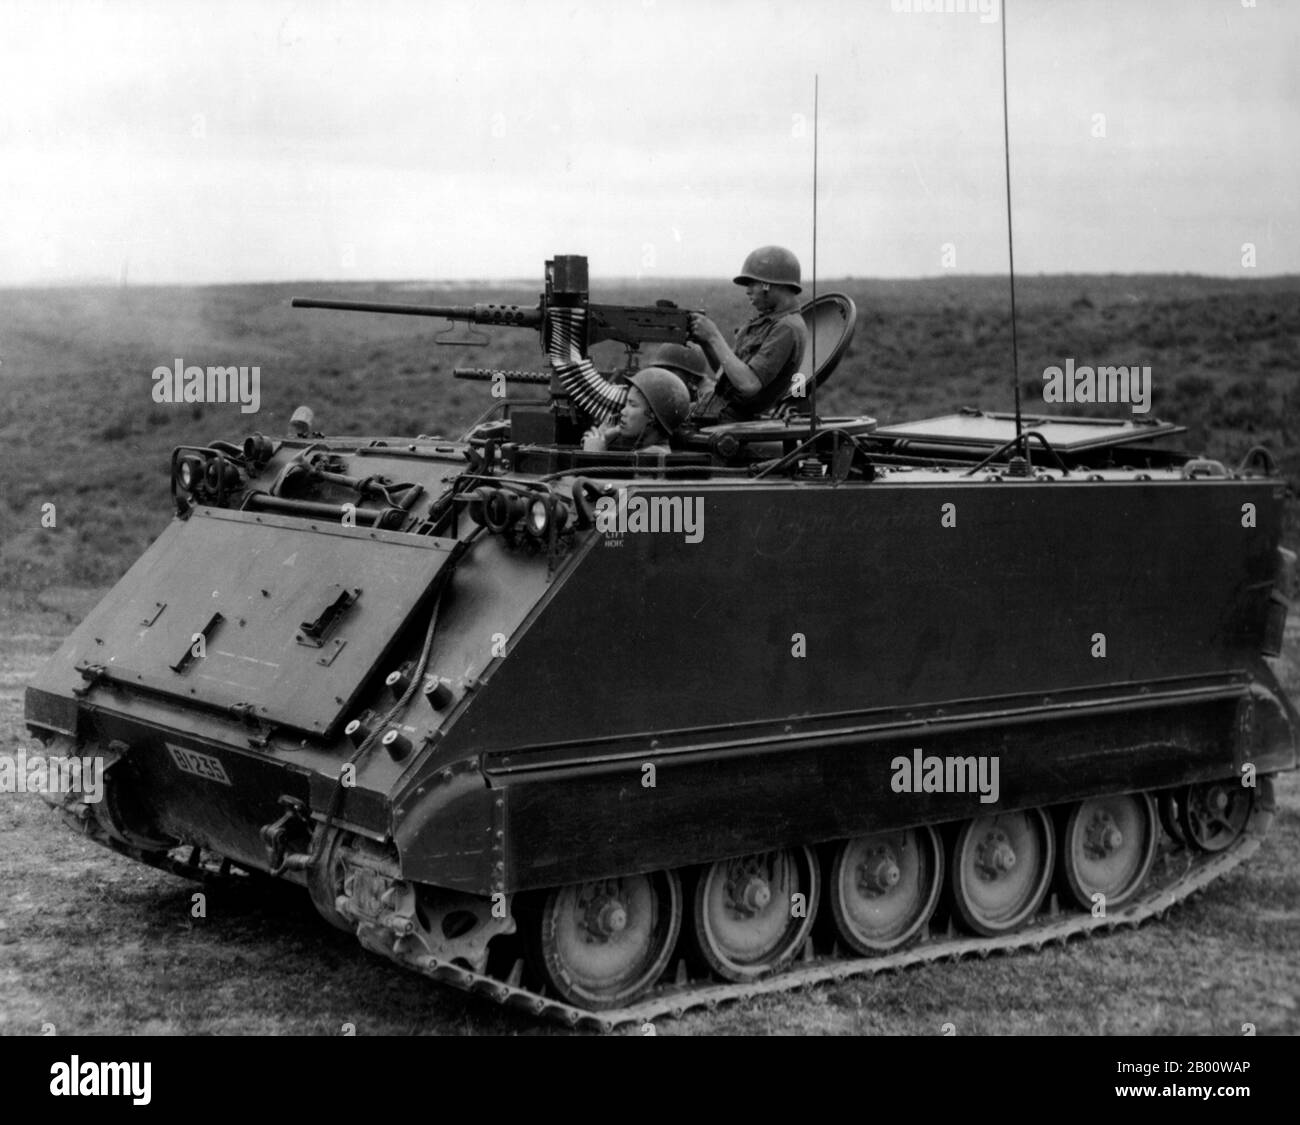 Vietnam: Army of the Republic of Vietnam (ARVN) troops in a M113 armoured vehicle.  The Second Indochina War, known in America as the Vietnam War, was a Cold War era military conflict that occurred in Vietnam, Laos, and Cambodia from 1 November 1955 to the fall of Saigon on 30 April 1975. This war followed the First Indochina War and was fought between North Vietnam, supported by its communist allies, and the government of South Vietnam, supported by the U.S. and other anti-communist nations. Stock Photo